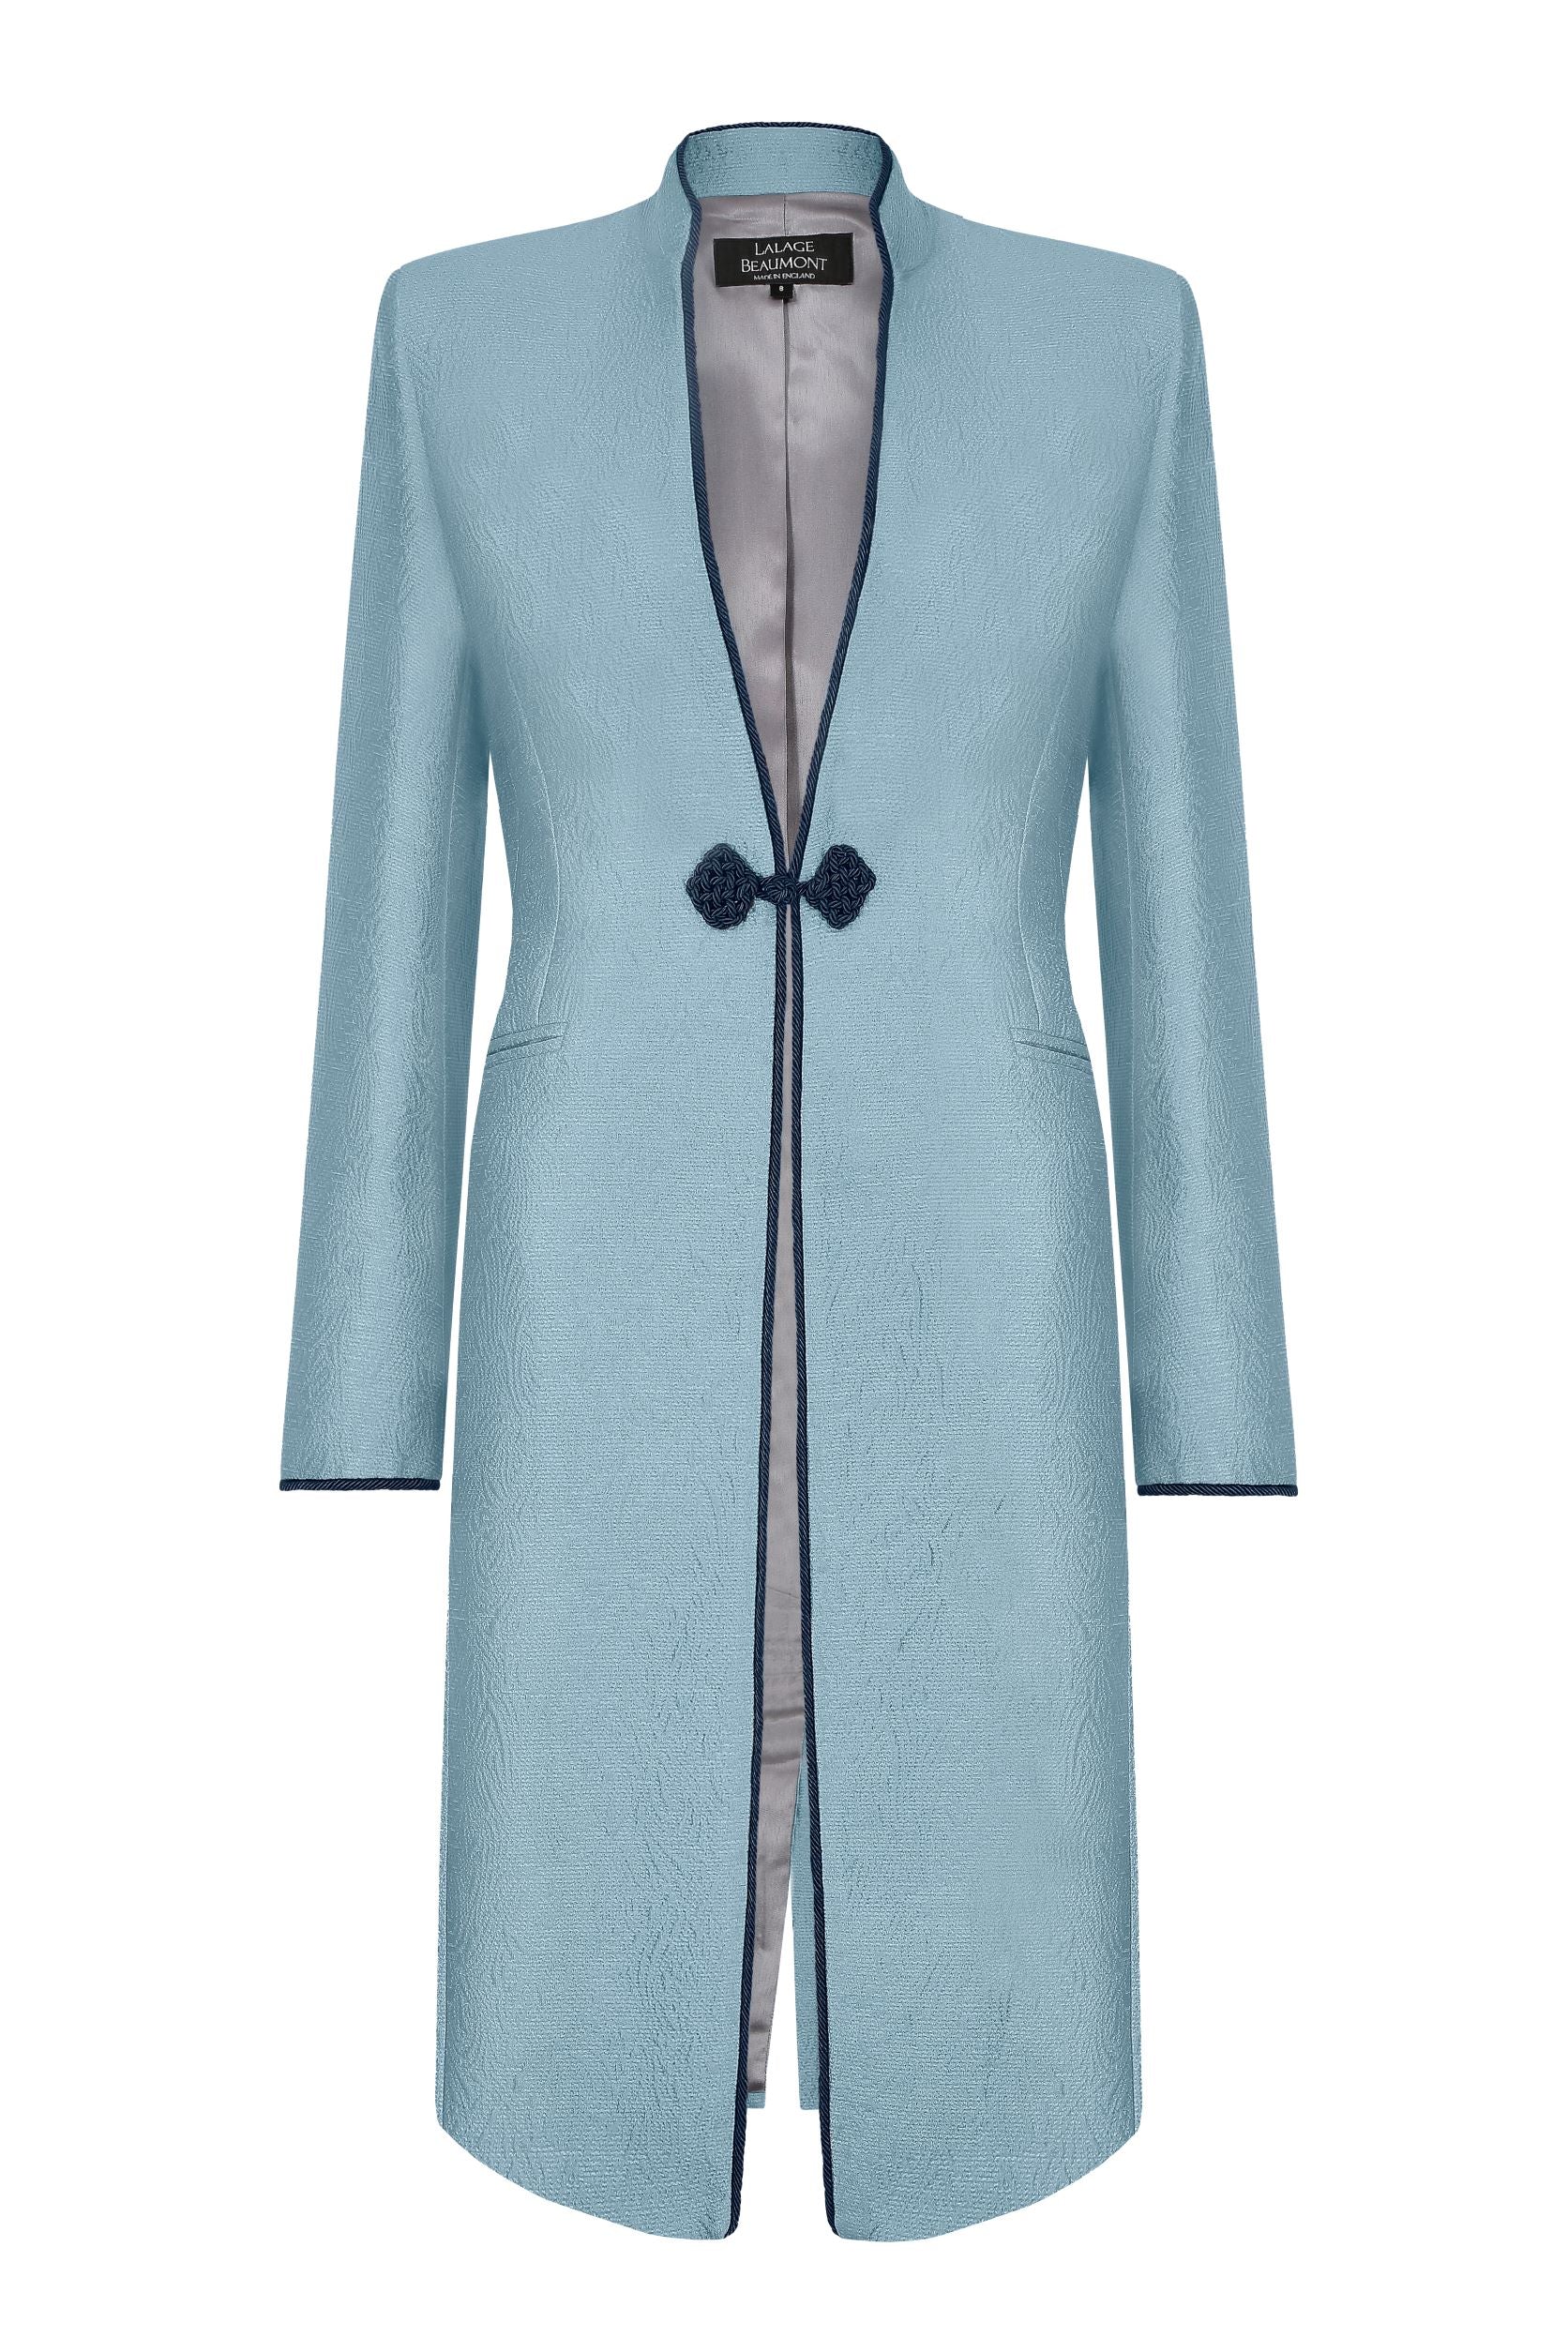 Vicky Ash Dress Coat | Lalage Beaumont